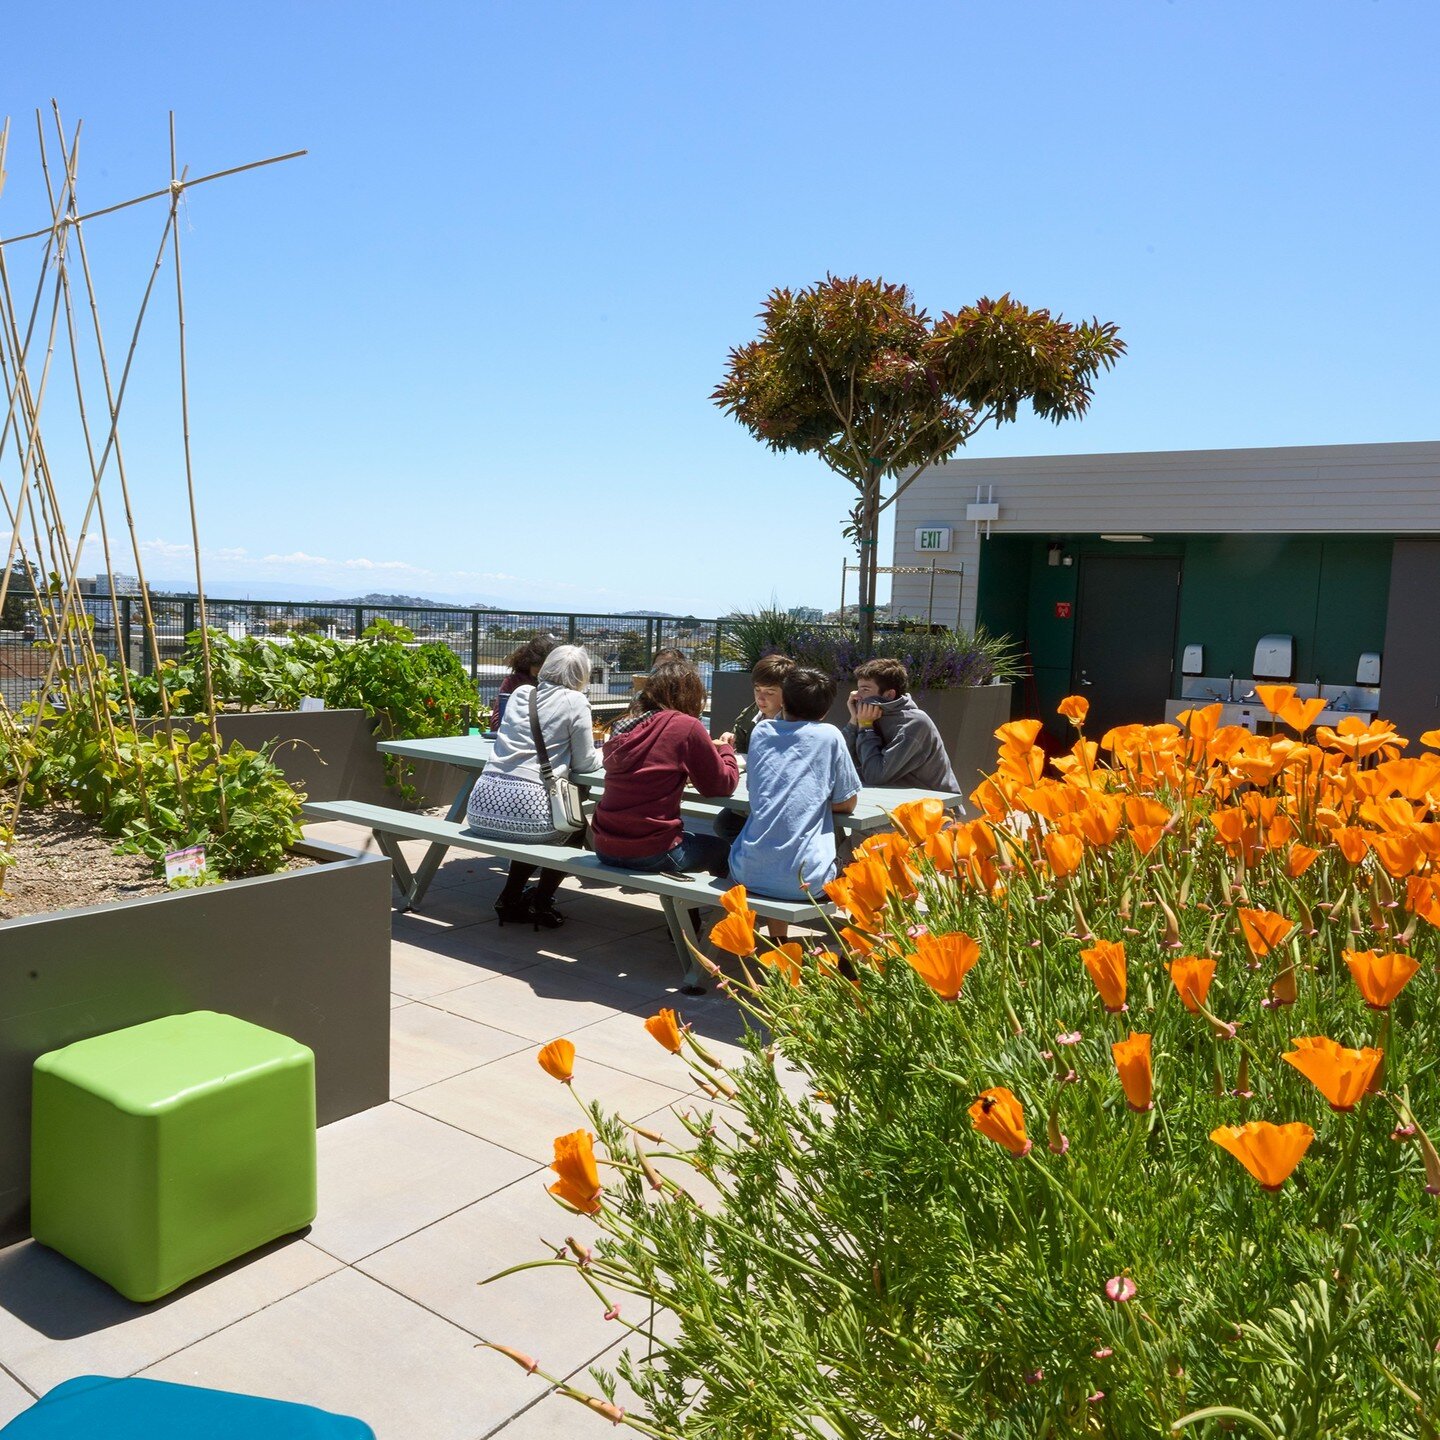 Featuring beautiful views of the surrounding city, the new garden roof terrace at San Francisco Day School provides outdoor classroom space for students to grow their own vegetables and learn in a hands-on environment. We are thrilled to see the gard